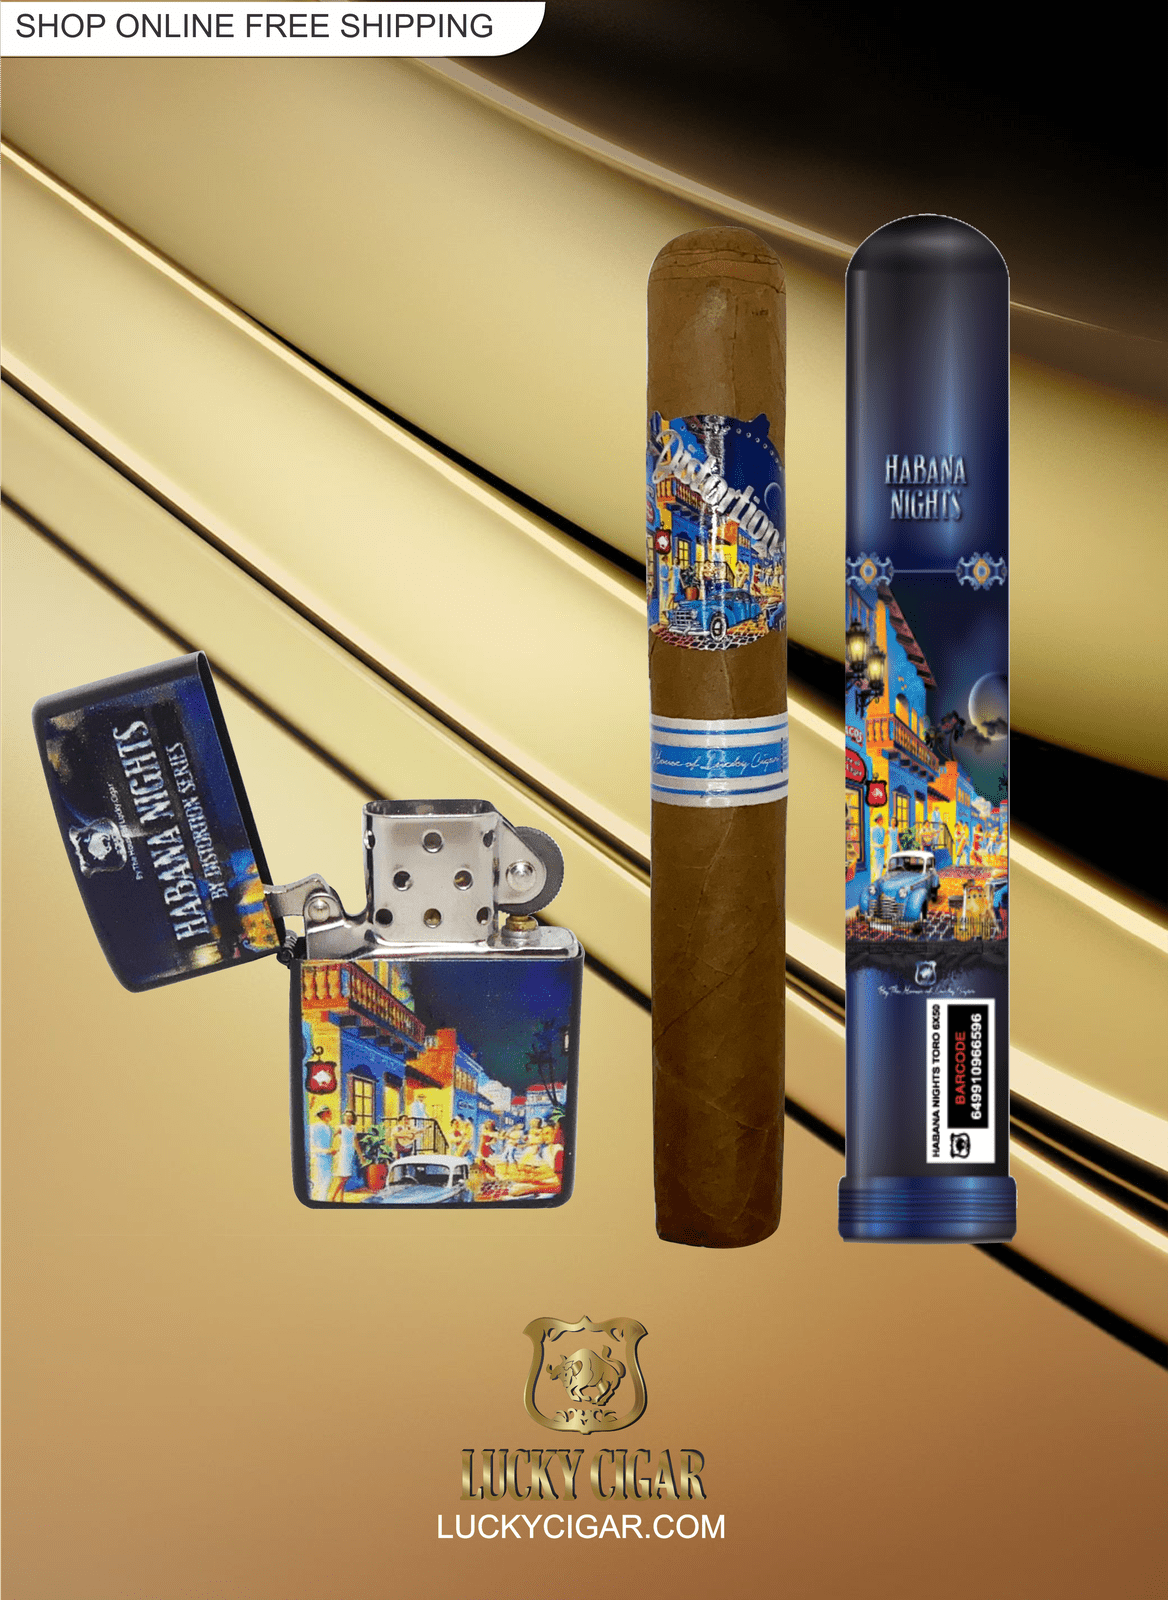 Habana Nights 6x50 Cigar From The Distortion Series: 1 Cigars with Zippo Style Lighter